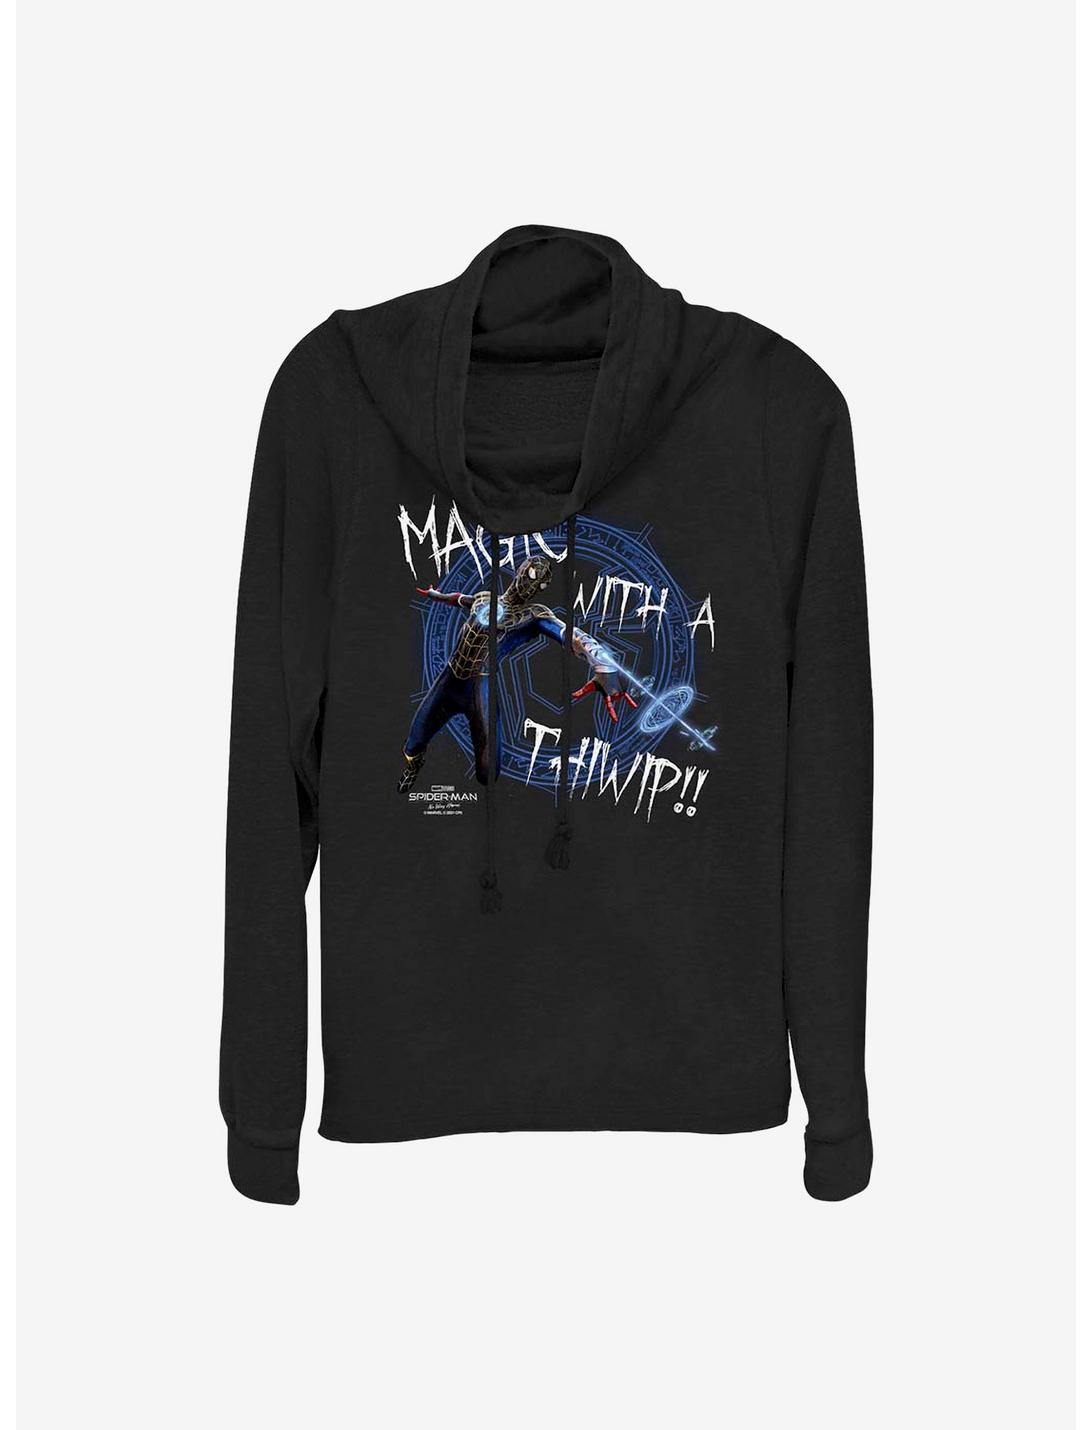 Marvel Spider-Man Magic With A Thiwip Cowlneck Long-Sleeve Girls Top, BLACK, hi-res